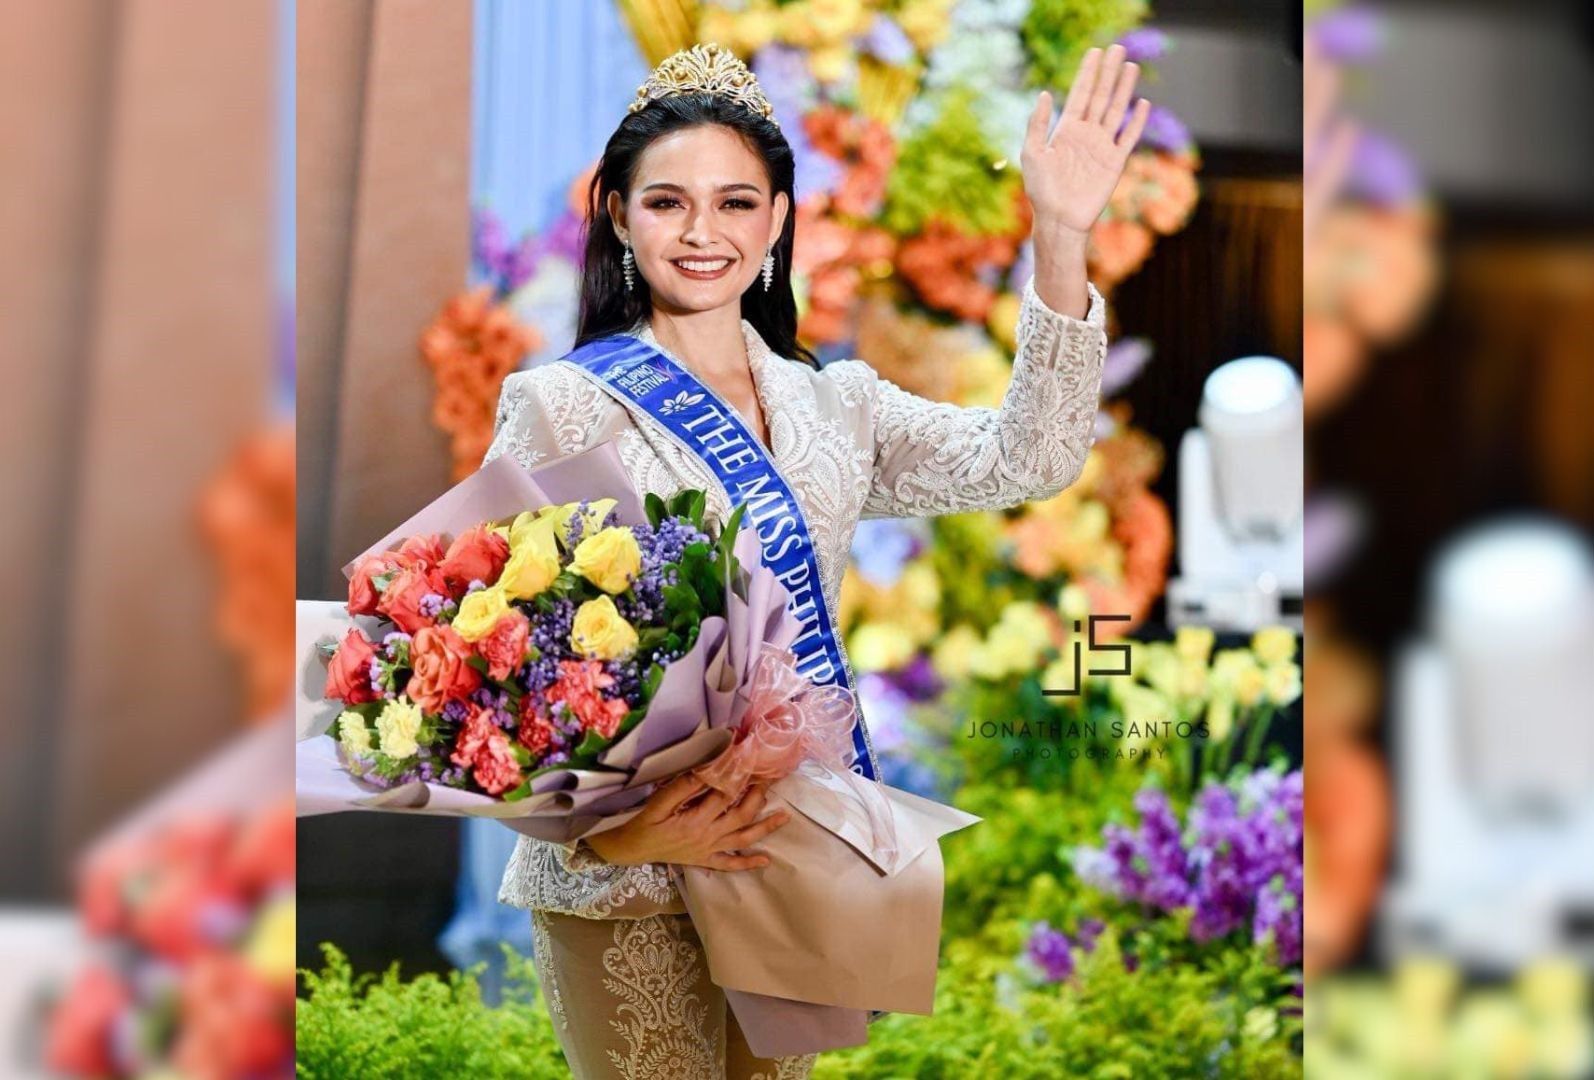 The Miss Philippines allows moms, married women to join